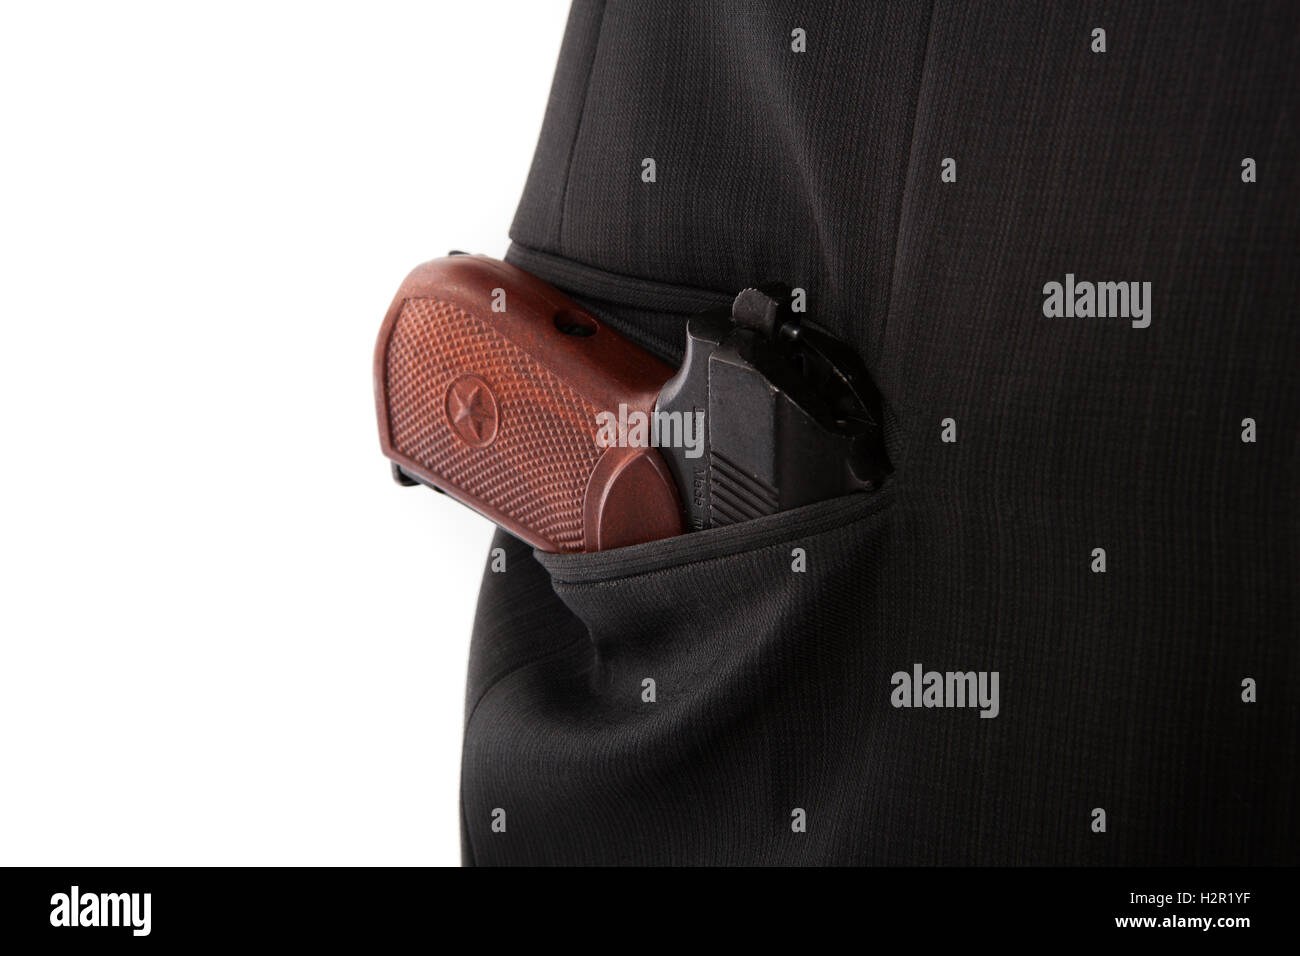 Makarov pistol in the pocket of a person Stock Photo